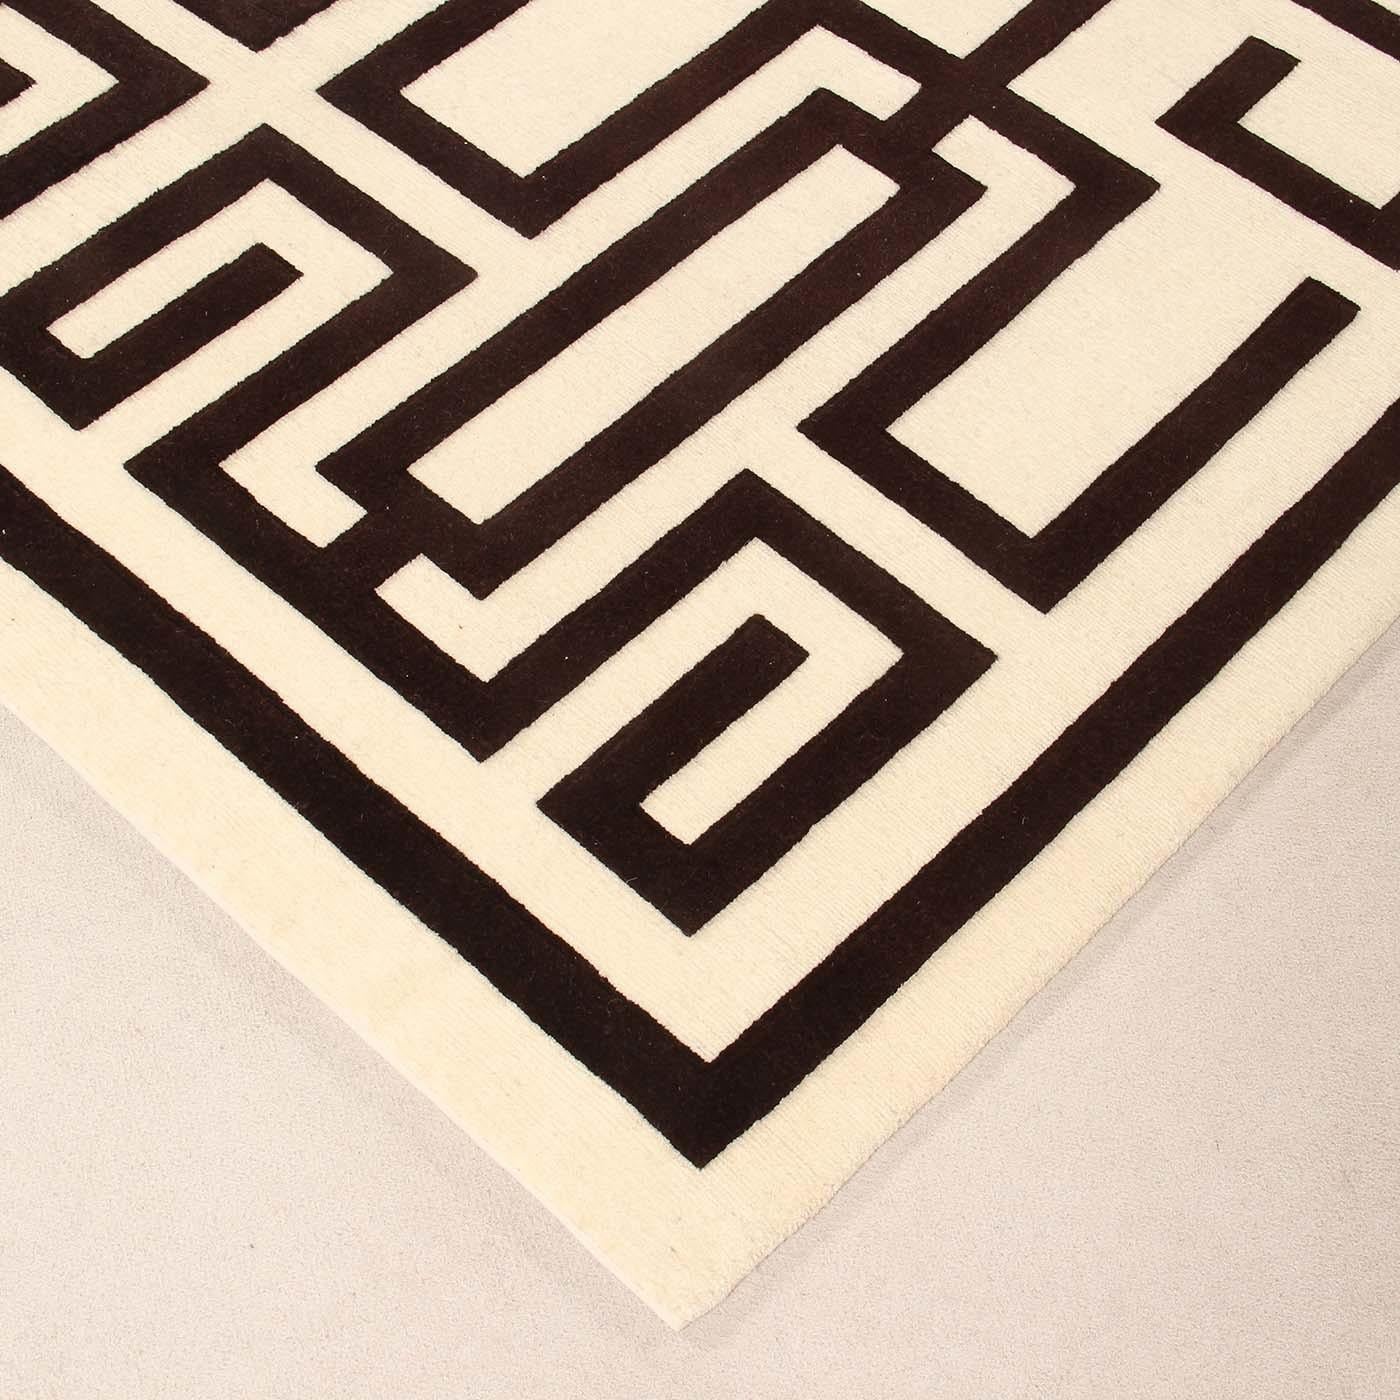 The symmetry of the pattern, the contrasts between the backgrounds, and the drawing bestow depth to the Labirinto carpet. An intriguing three-dimensional pattern originally designed by Gio Ponti to recreate a contemporary, yet classical, diamond